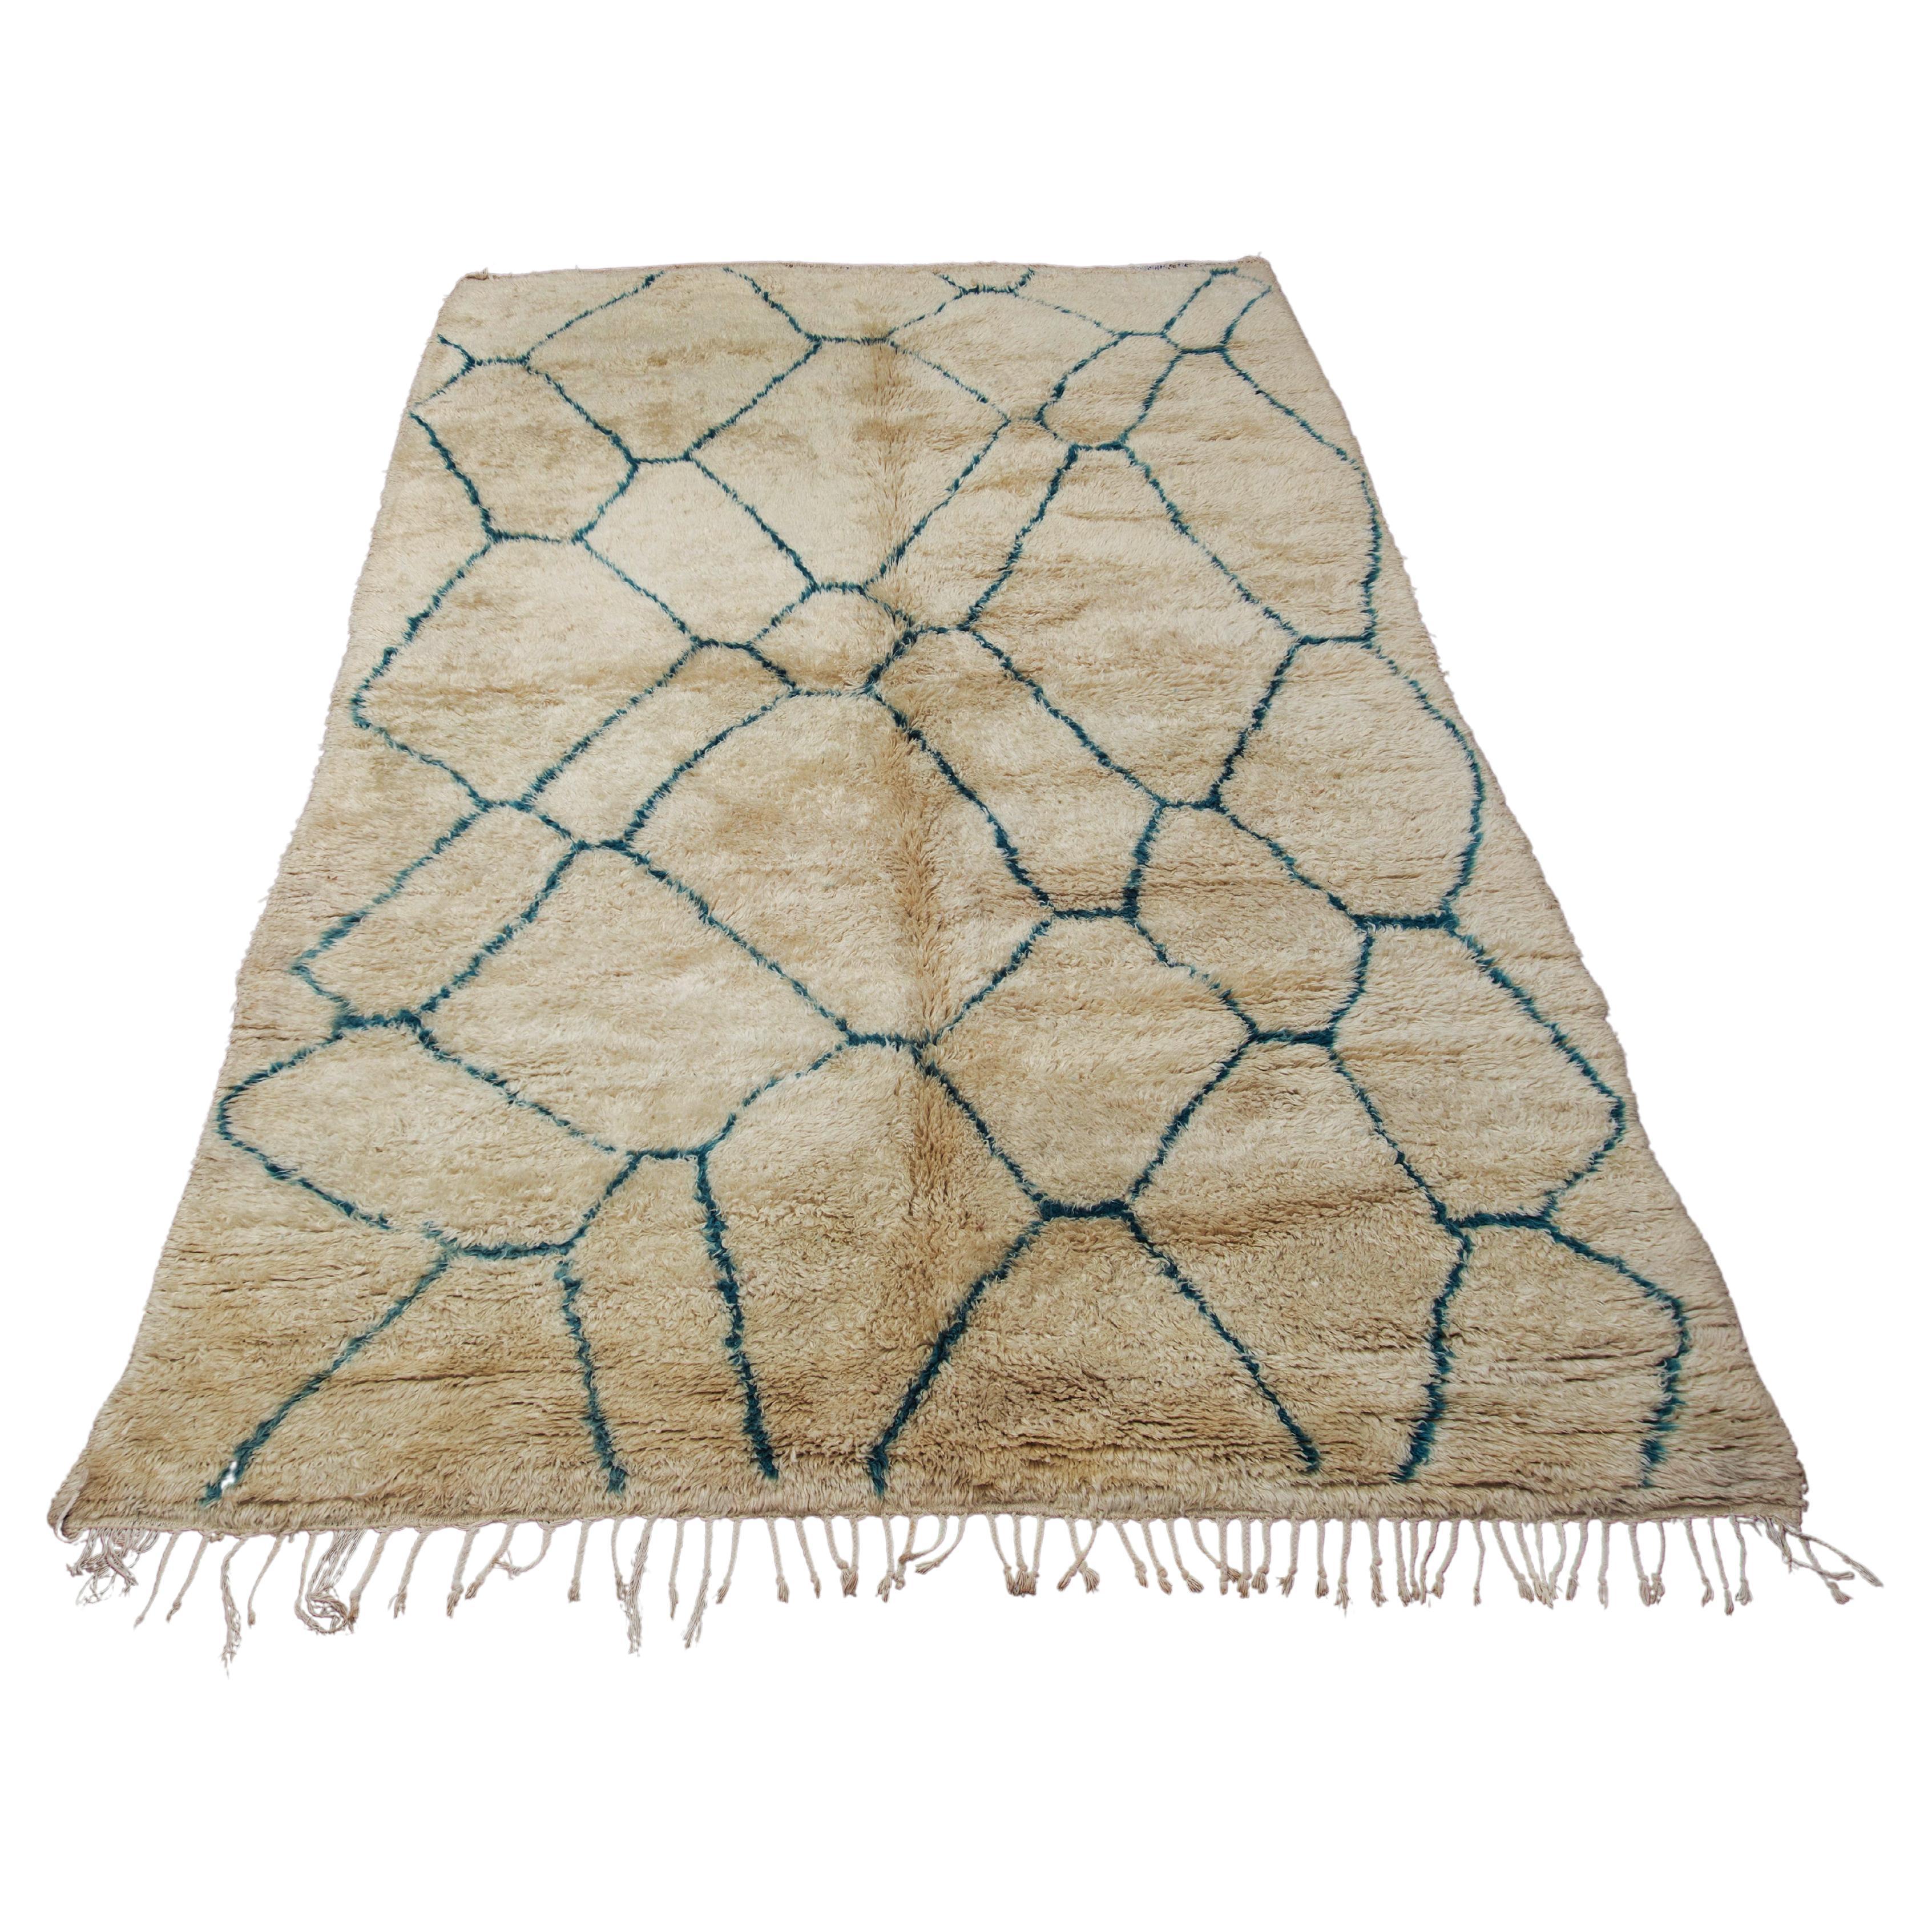 Neutral and Teal Moroccan Rug  10'5" x 6'9"  